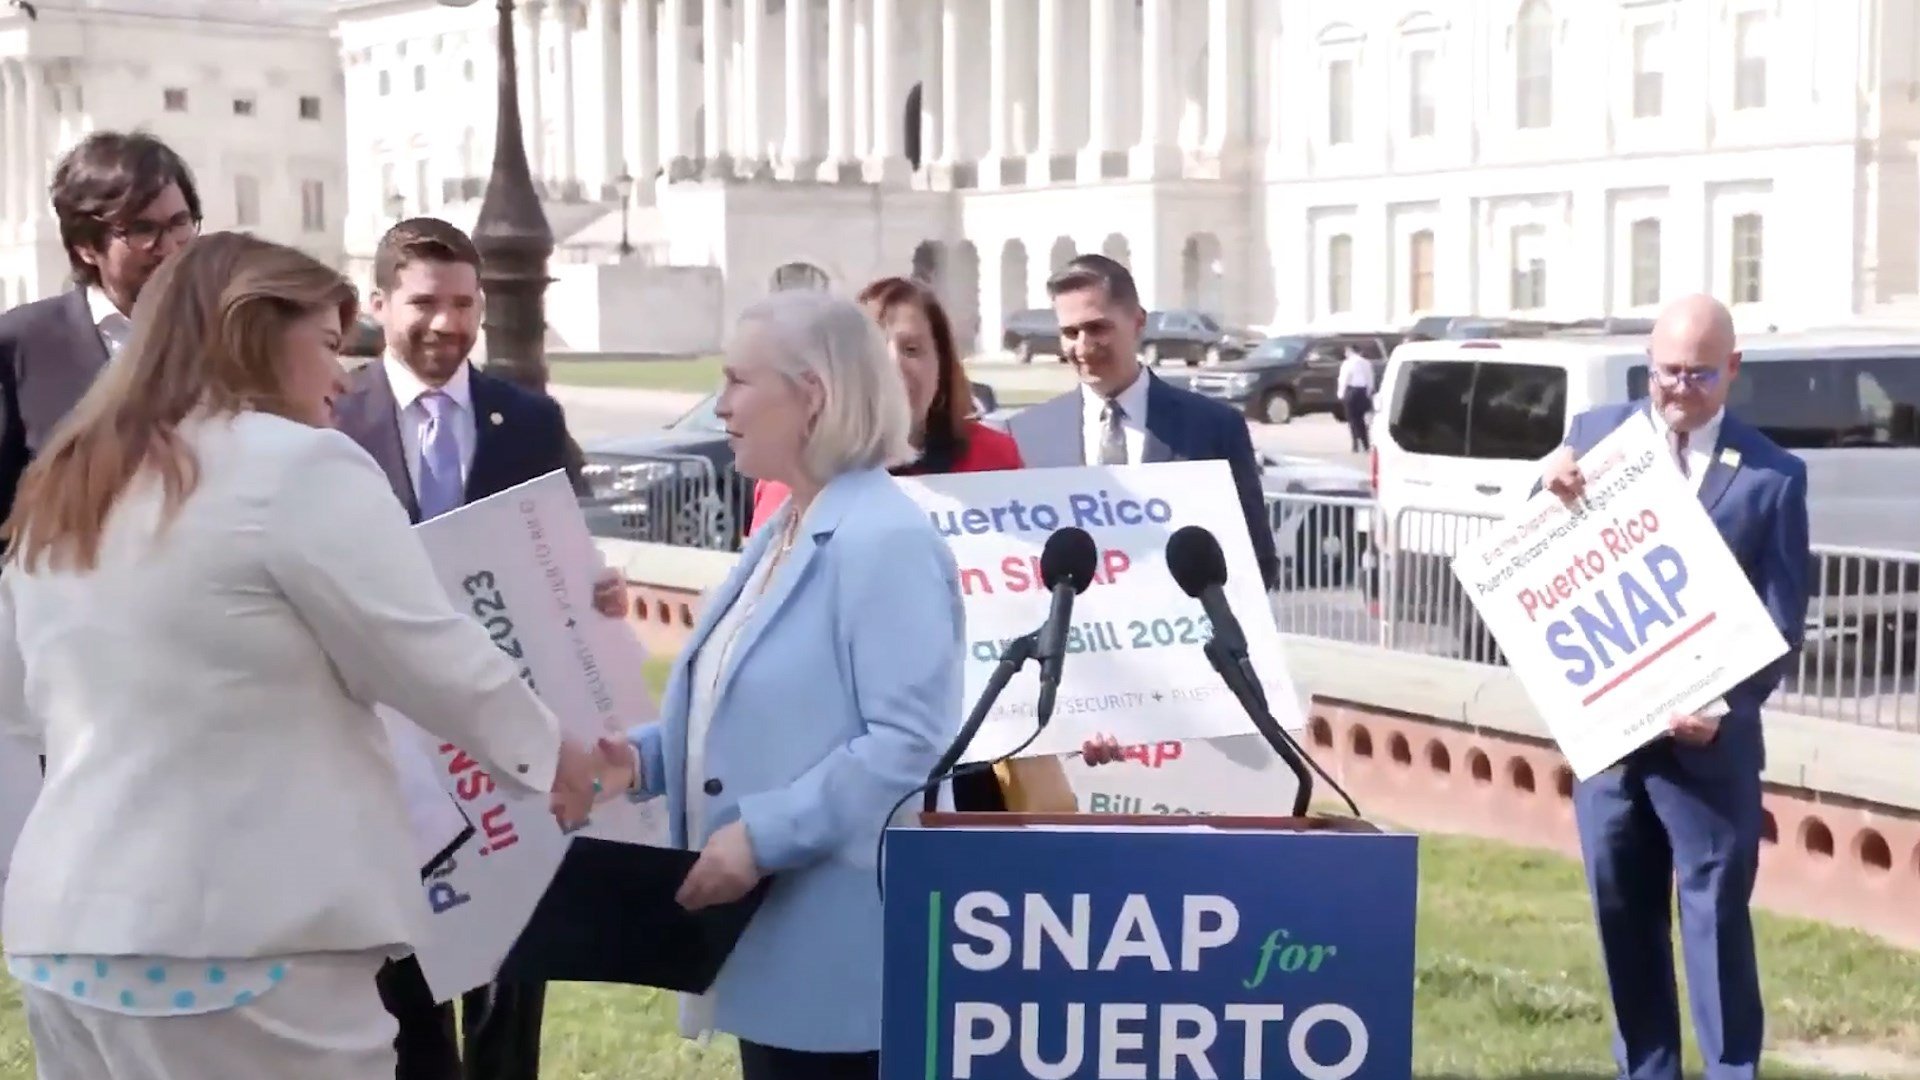 Bipartisan Push for SNAP Benefits in Puerto Rico